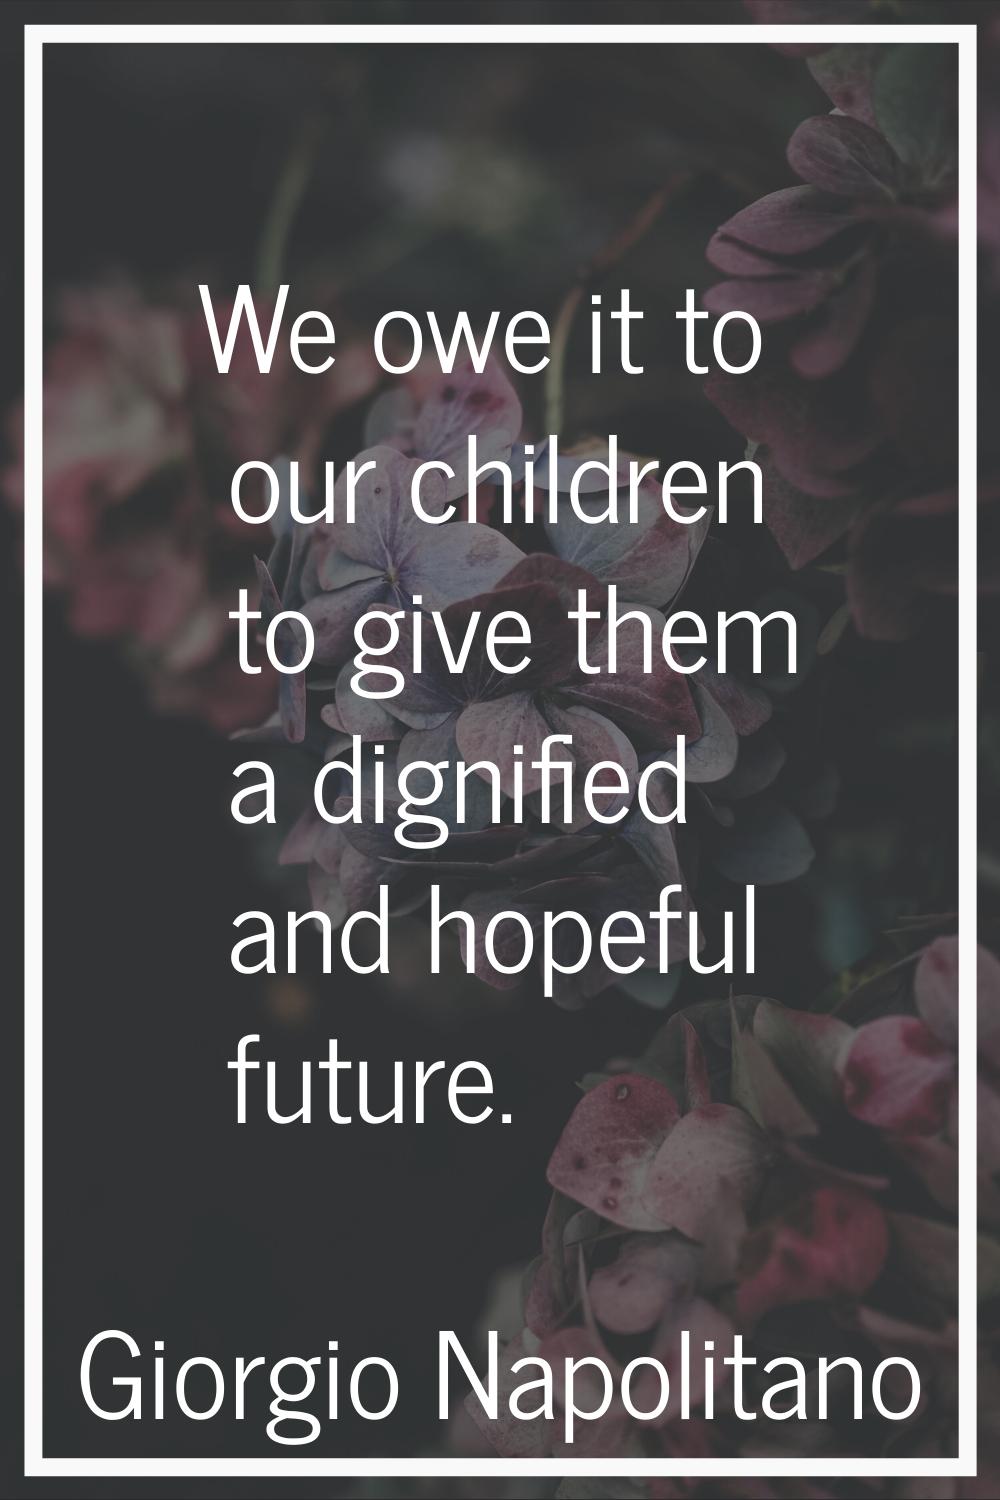 We owe it to our children to give them a dignified and hopeful future.